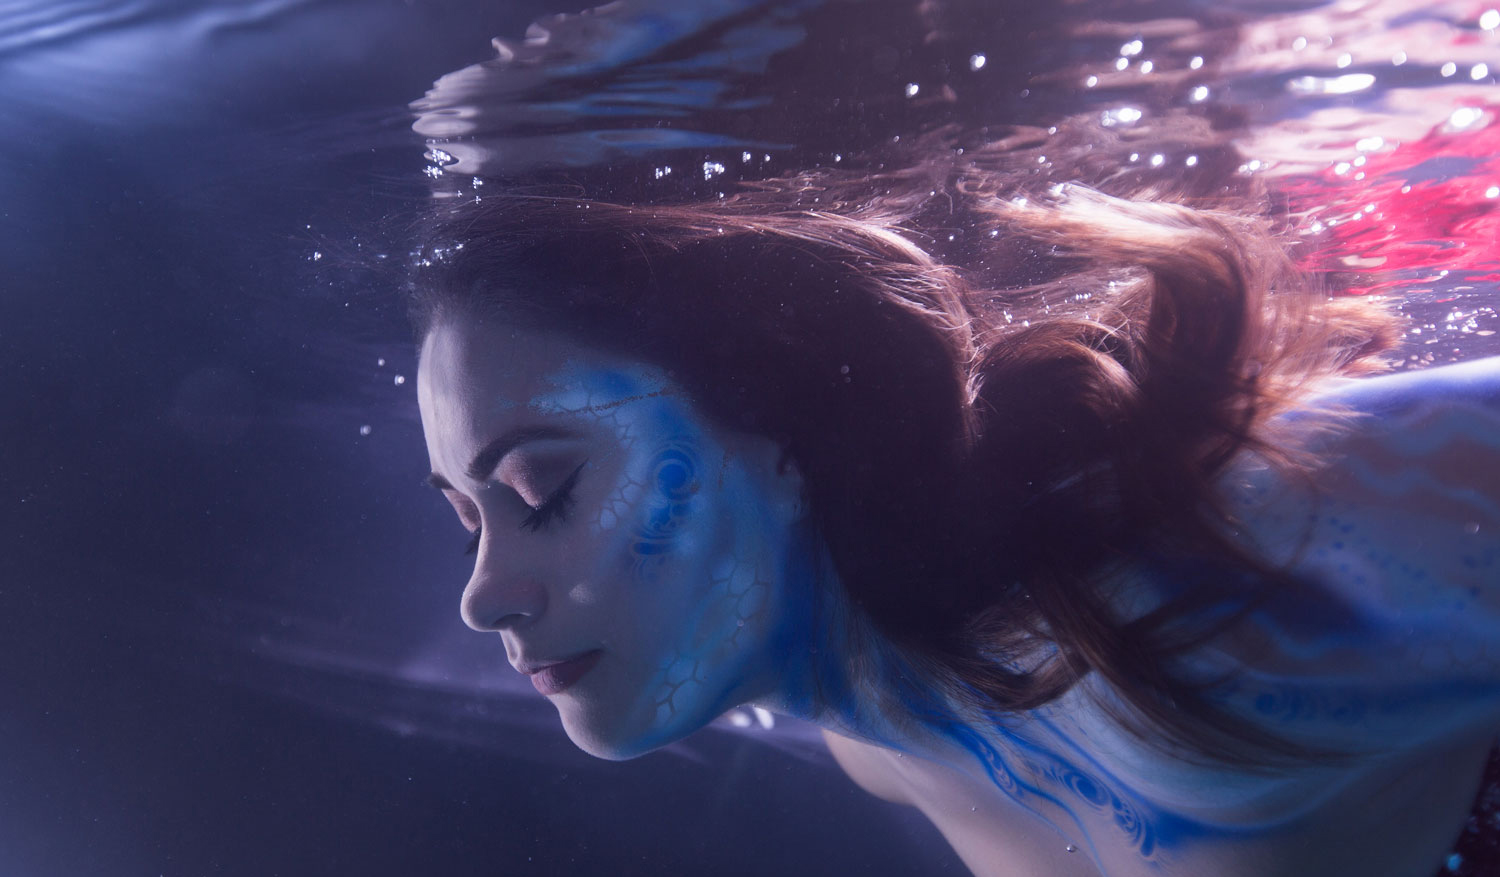 A photo of a woman's head and shoulders submerged in water. Her face and body are painted with scales. The photo was taken as part of a promotion by H&M Communications for the movie the Shape of Water.